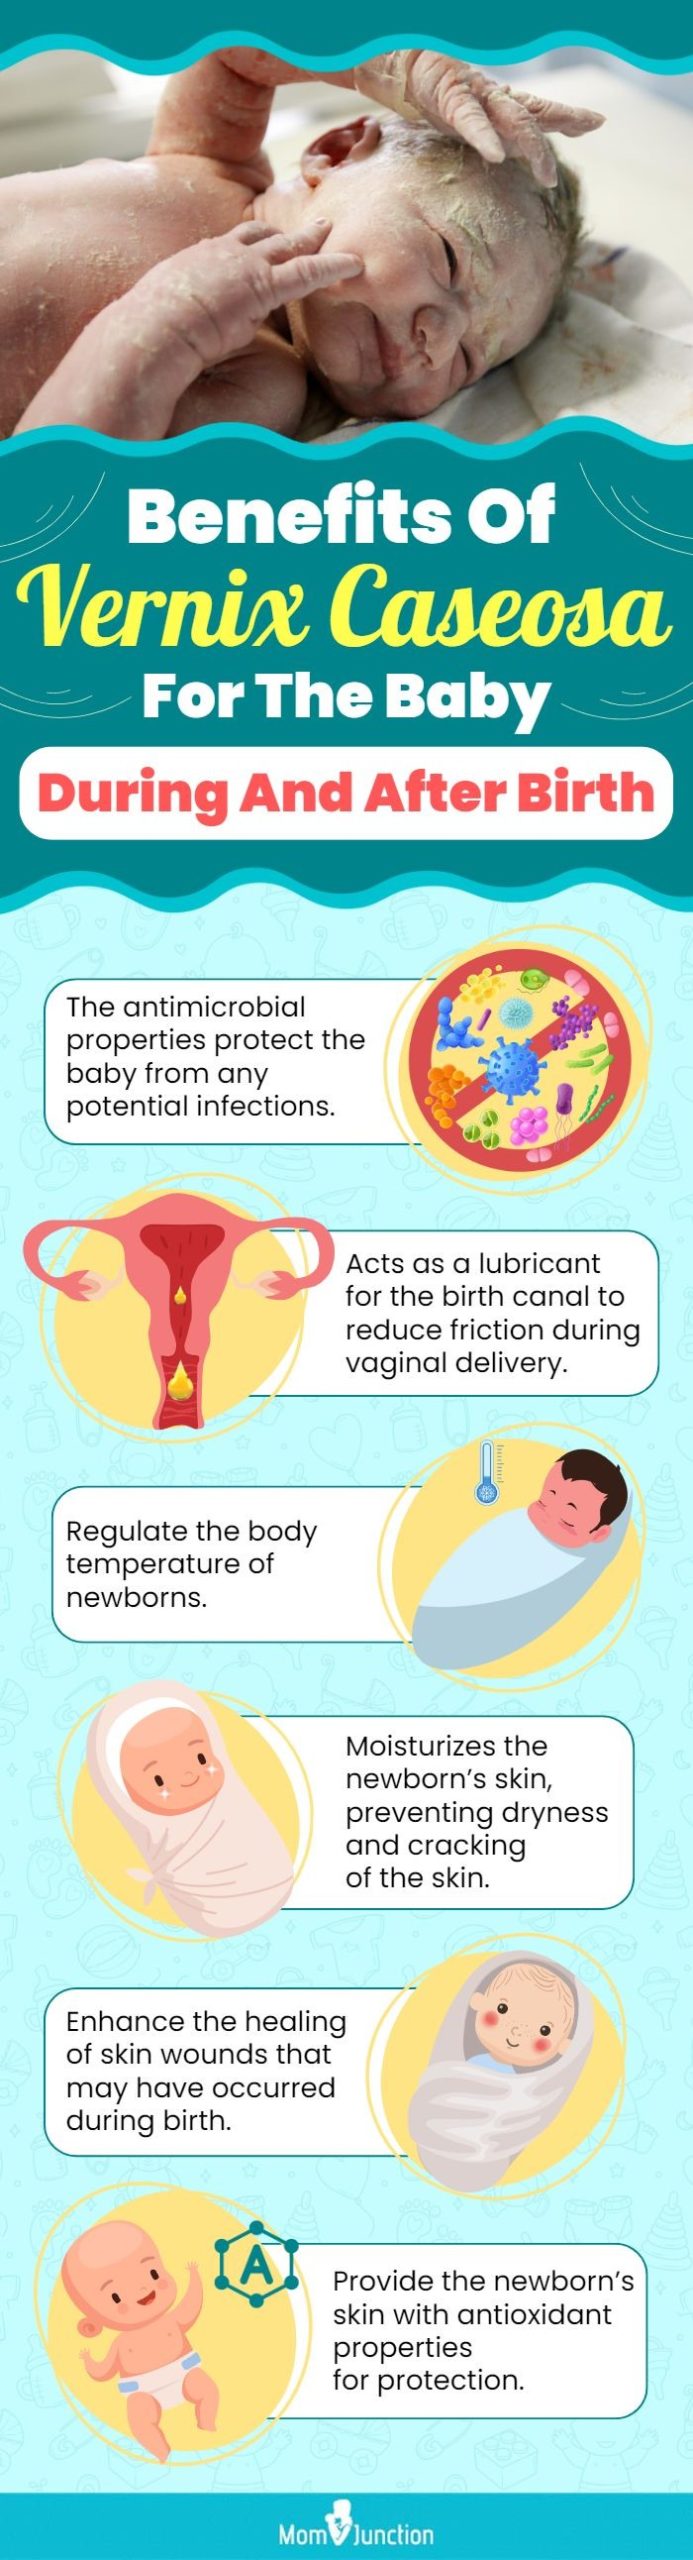 benefits of vernix caseosa for the baby during and after birth (infographic)